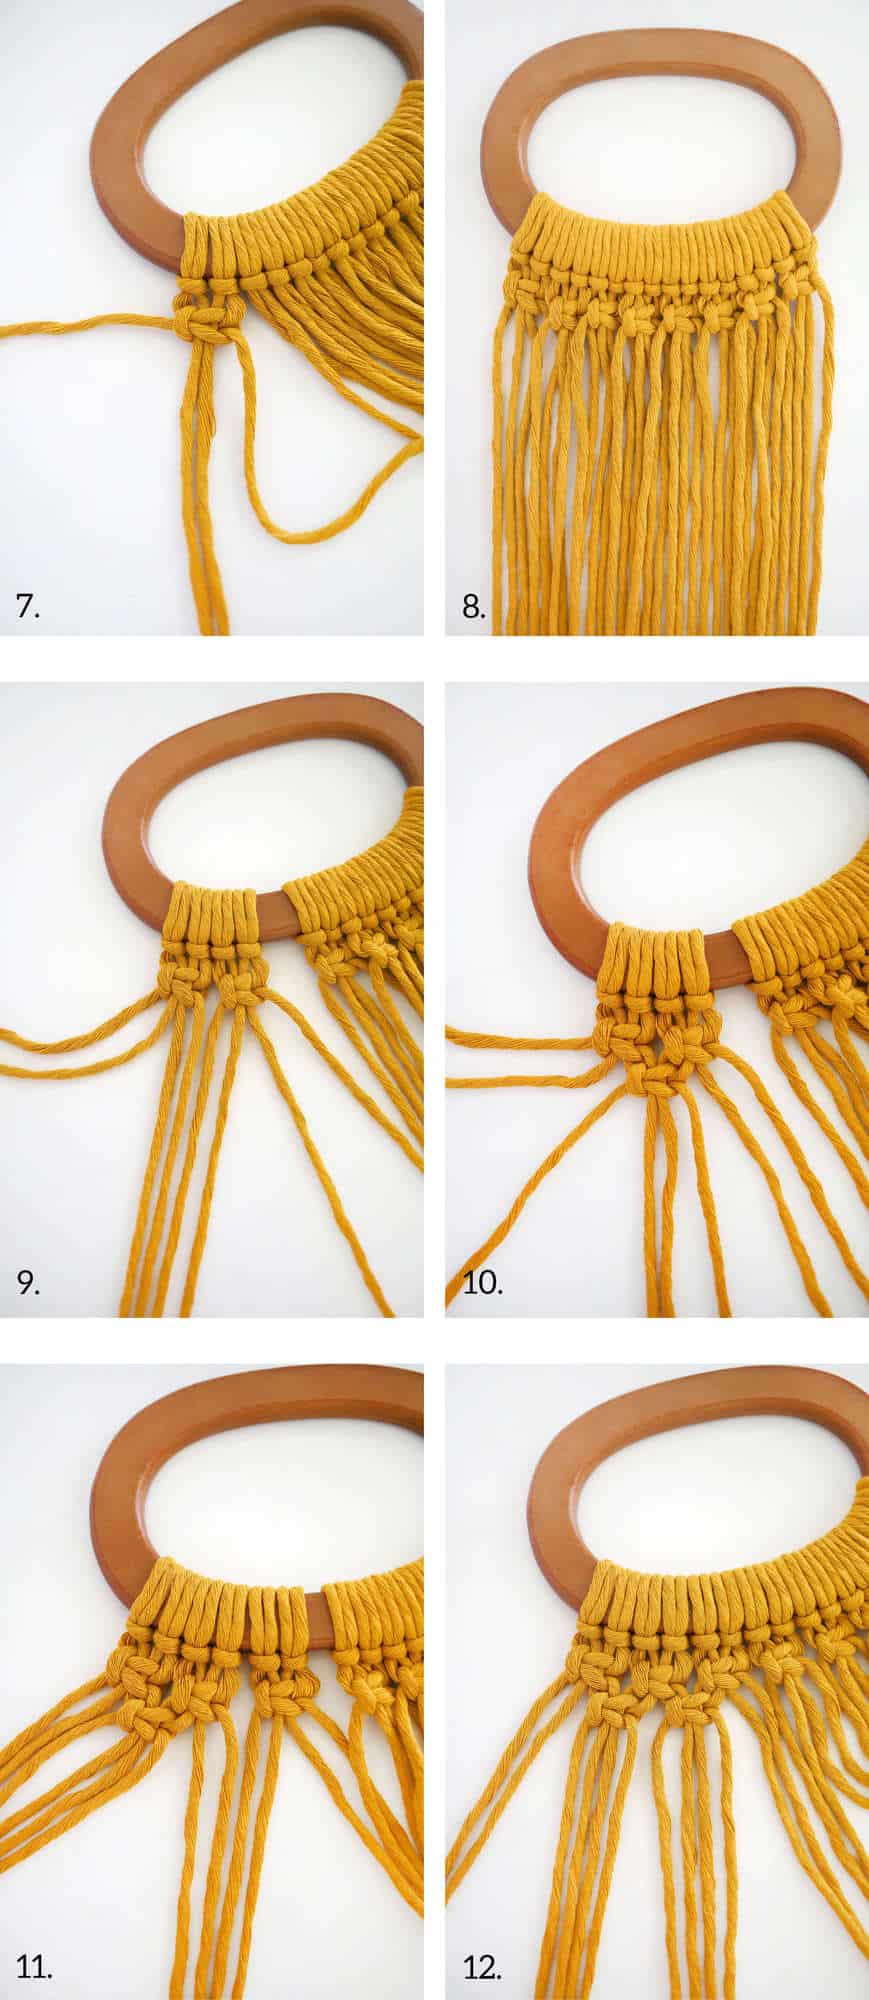 photo 7 - yellow cotton cord being tied together while on wooden round shaped handle, photo 8 - wooden round shaped handle with yellow cotton cord tied to it and top row in knots, photo 9 - 4 strands of yellow cotton cord pulled away from other strands tied to wooden round shaped handle, photo 10 - yellow cotton cord being tied together on wooden round shaped handle, photo 11 - yellow cotton cord being tied together on wooden round shaped handle, and photo 12 - yellow cotton cord being tied together on wooden round shaped handle